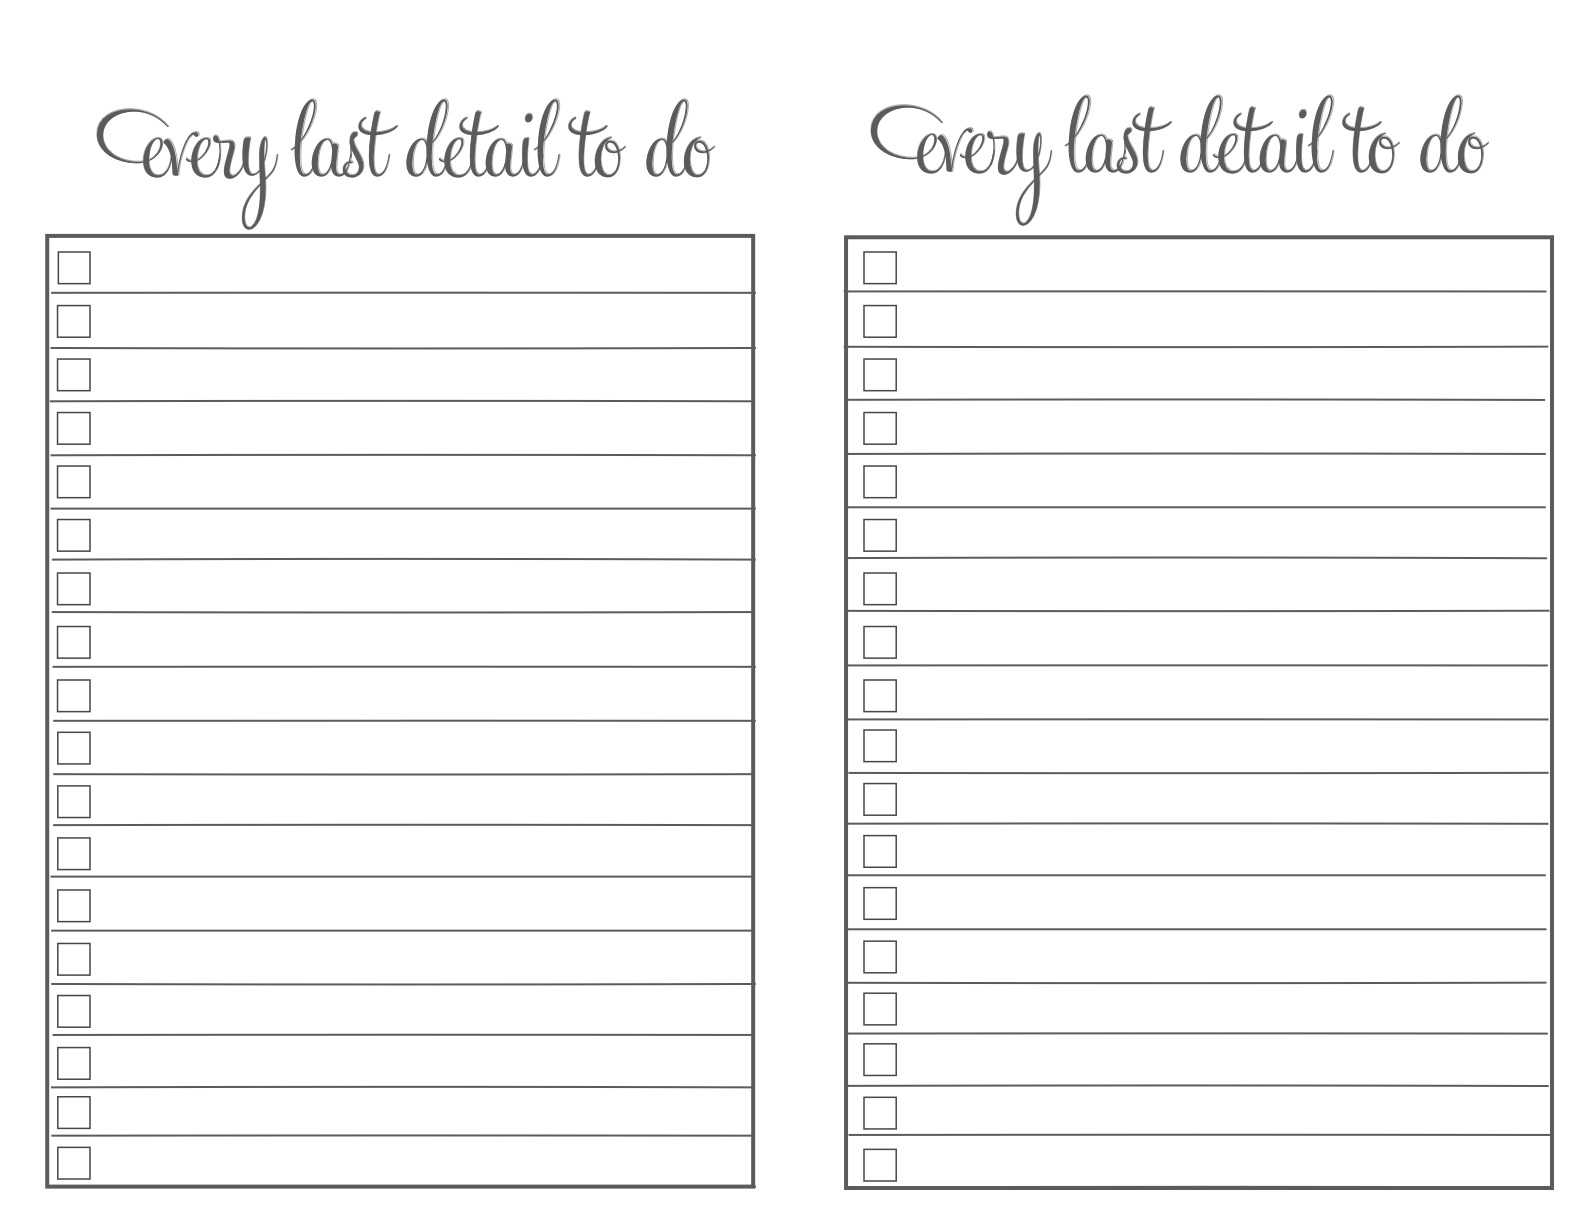 40-printable-to-do-list-templates-kittybabylove-throughout-blank-to